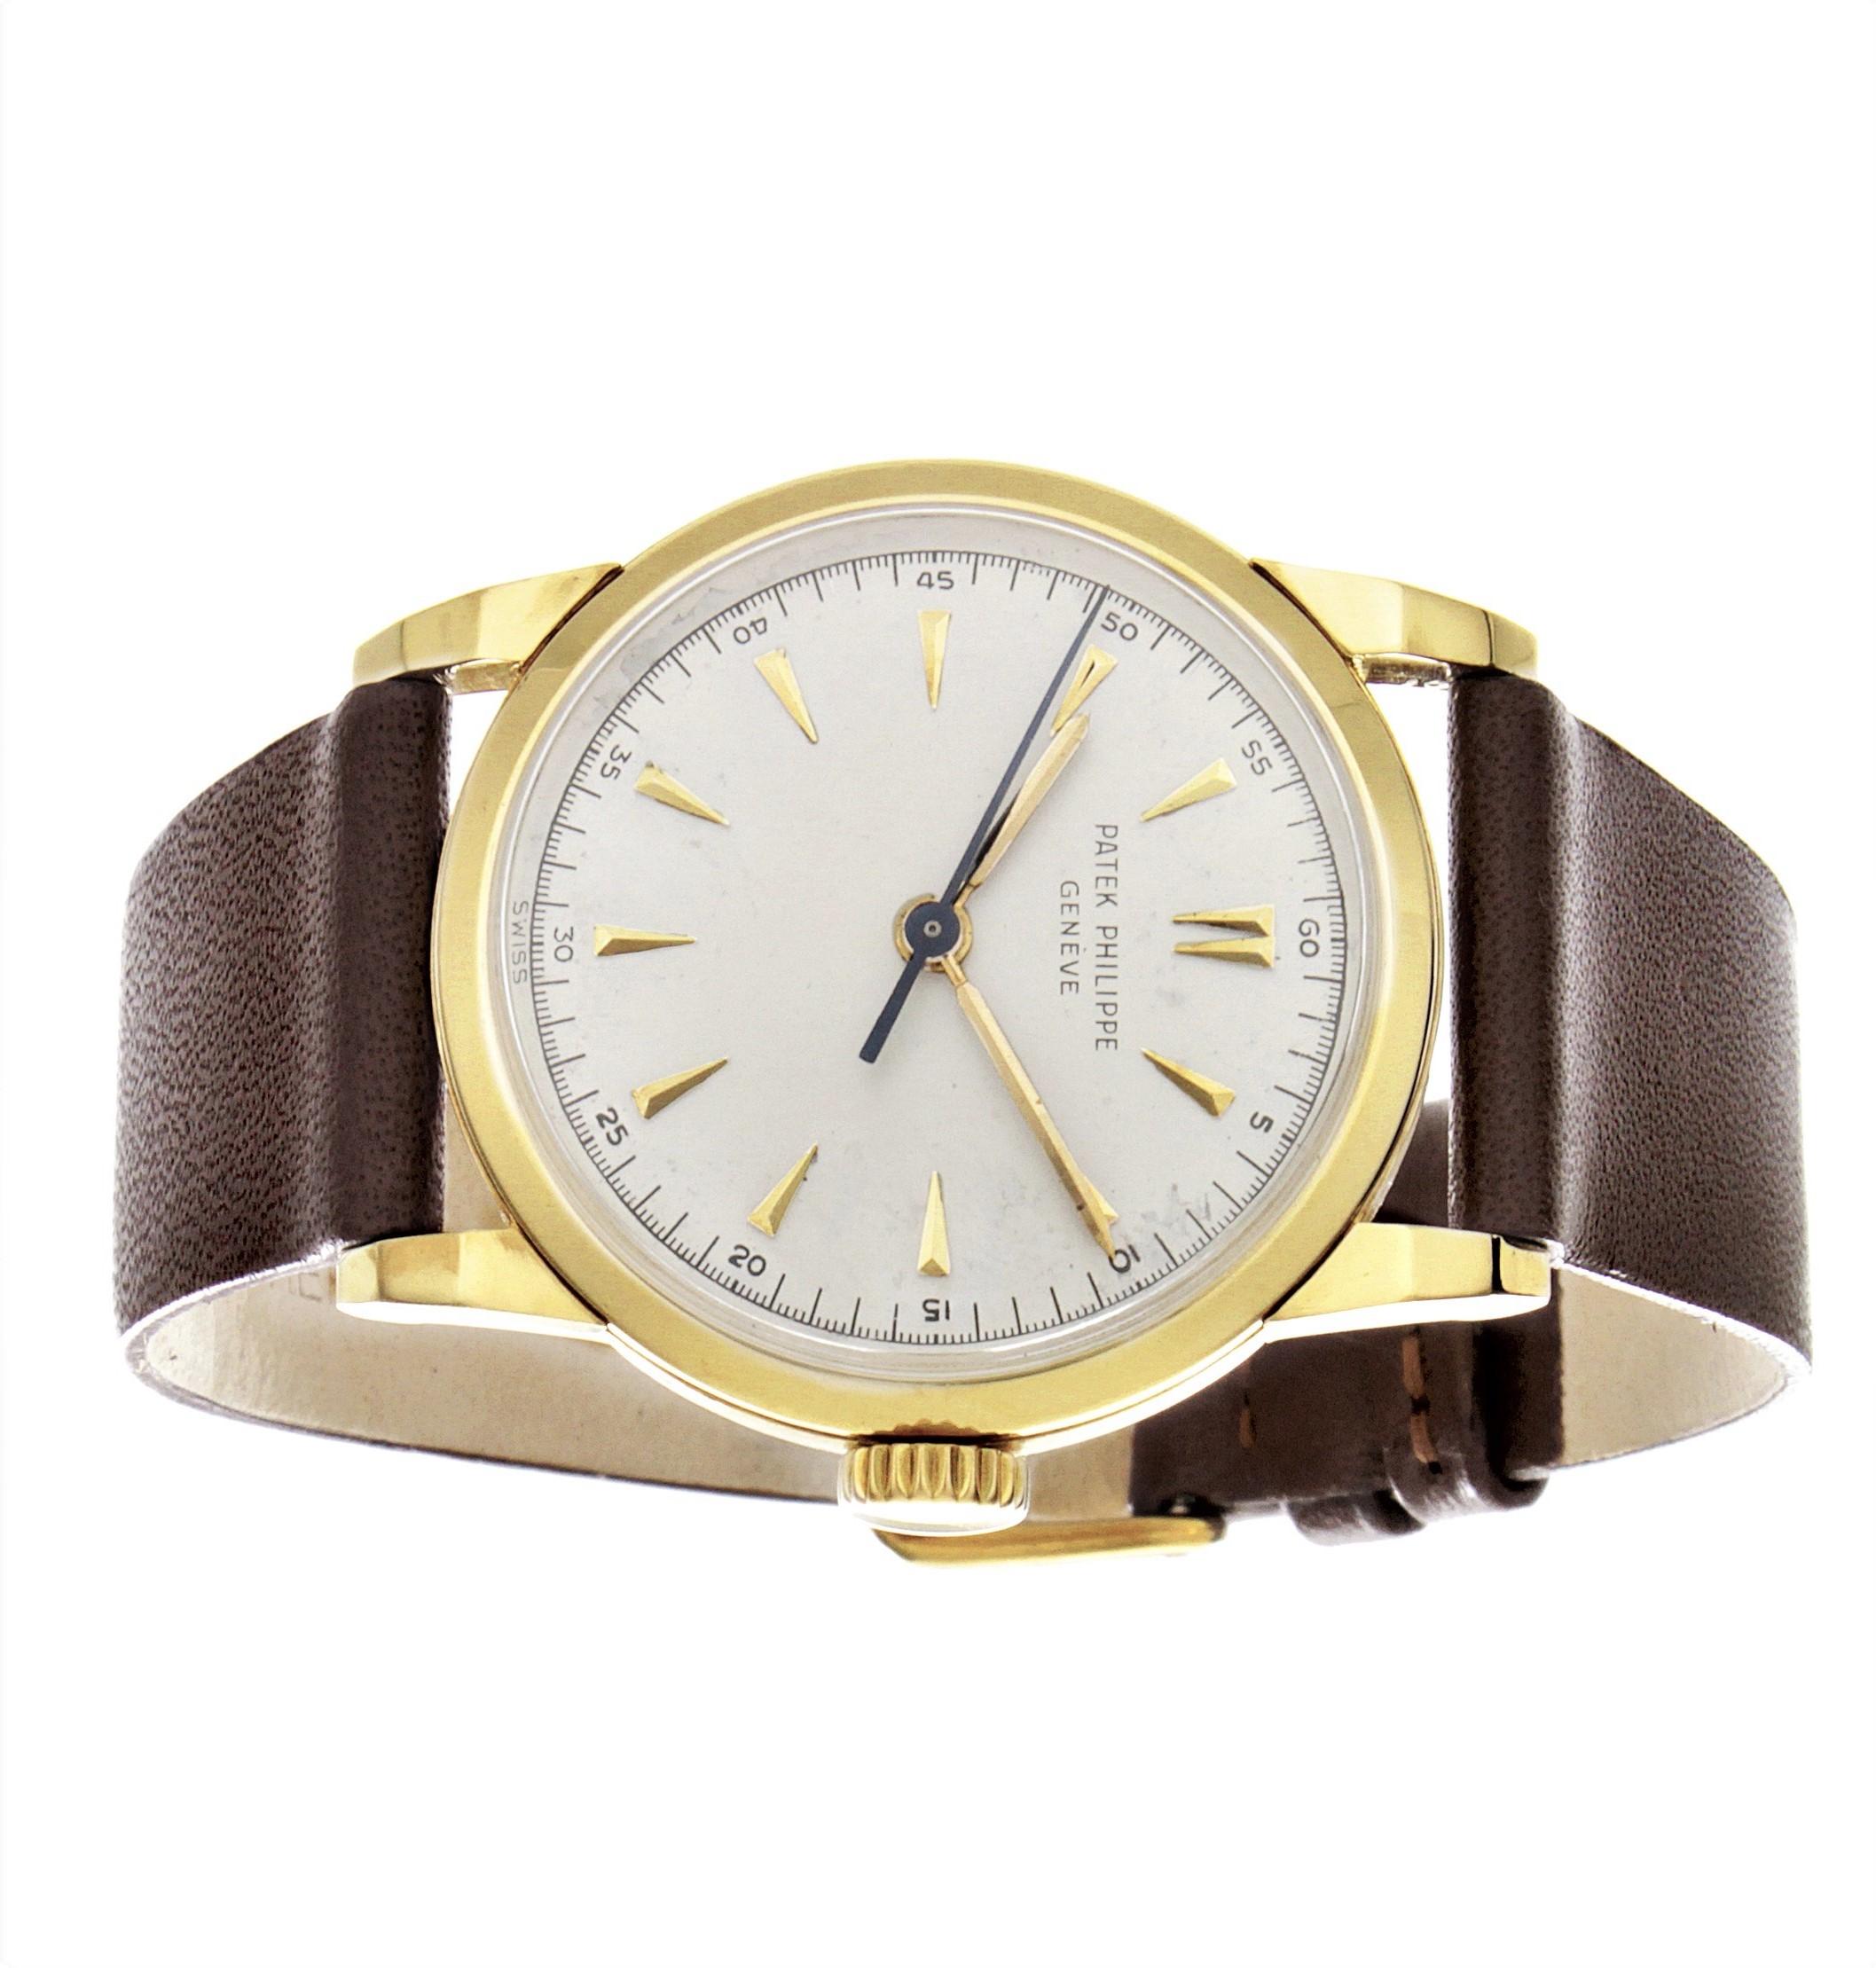 Introduction:  Patek Philippe 2460J, Vintage Calatrava made in 18K yellow gold, and measuring 32 mm in diameter, with a 3-body case, with wide heavy faceted lapped lugs, original crown and dial.  The watch is fitted with an 27 SC caliber center